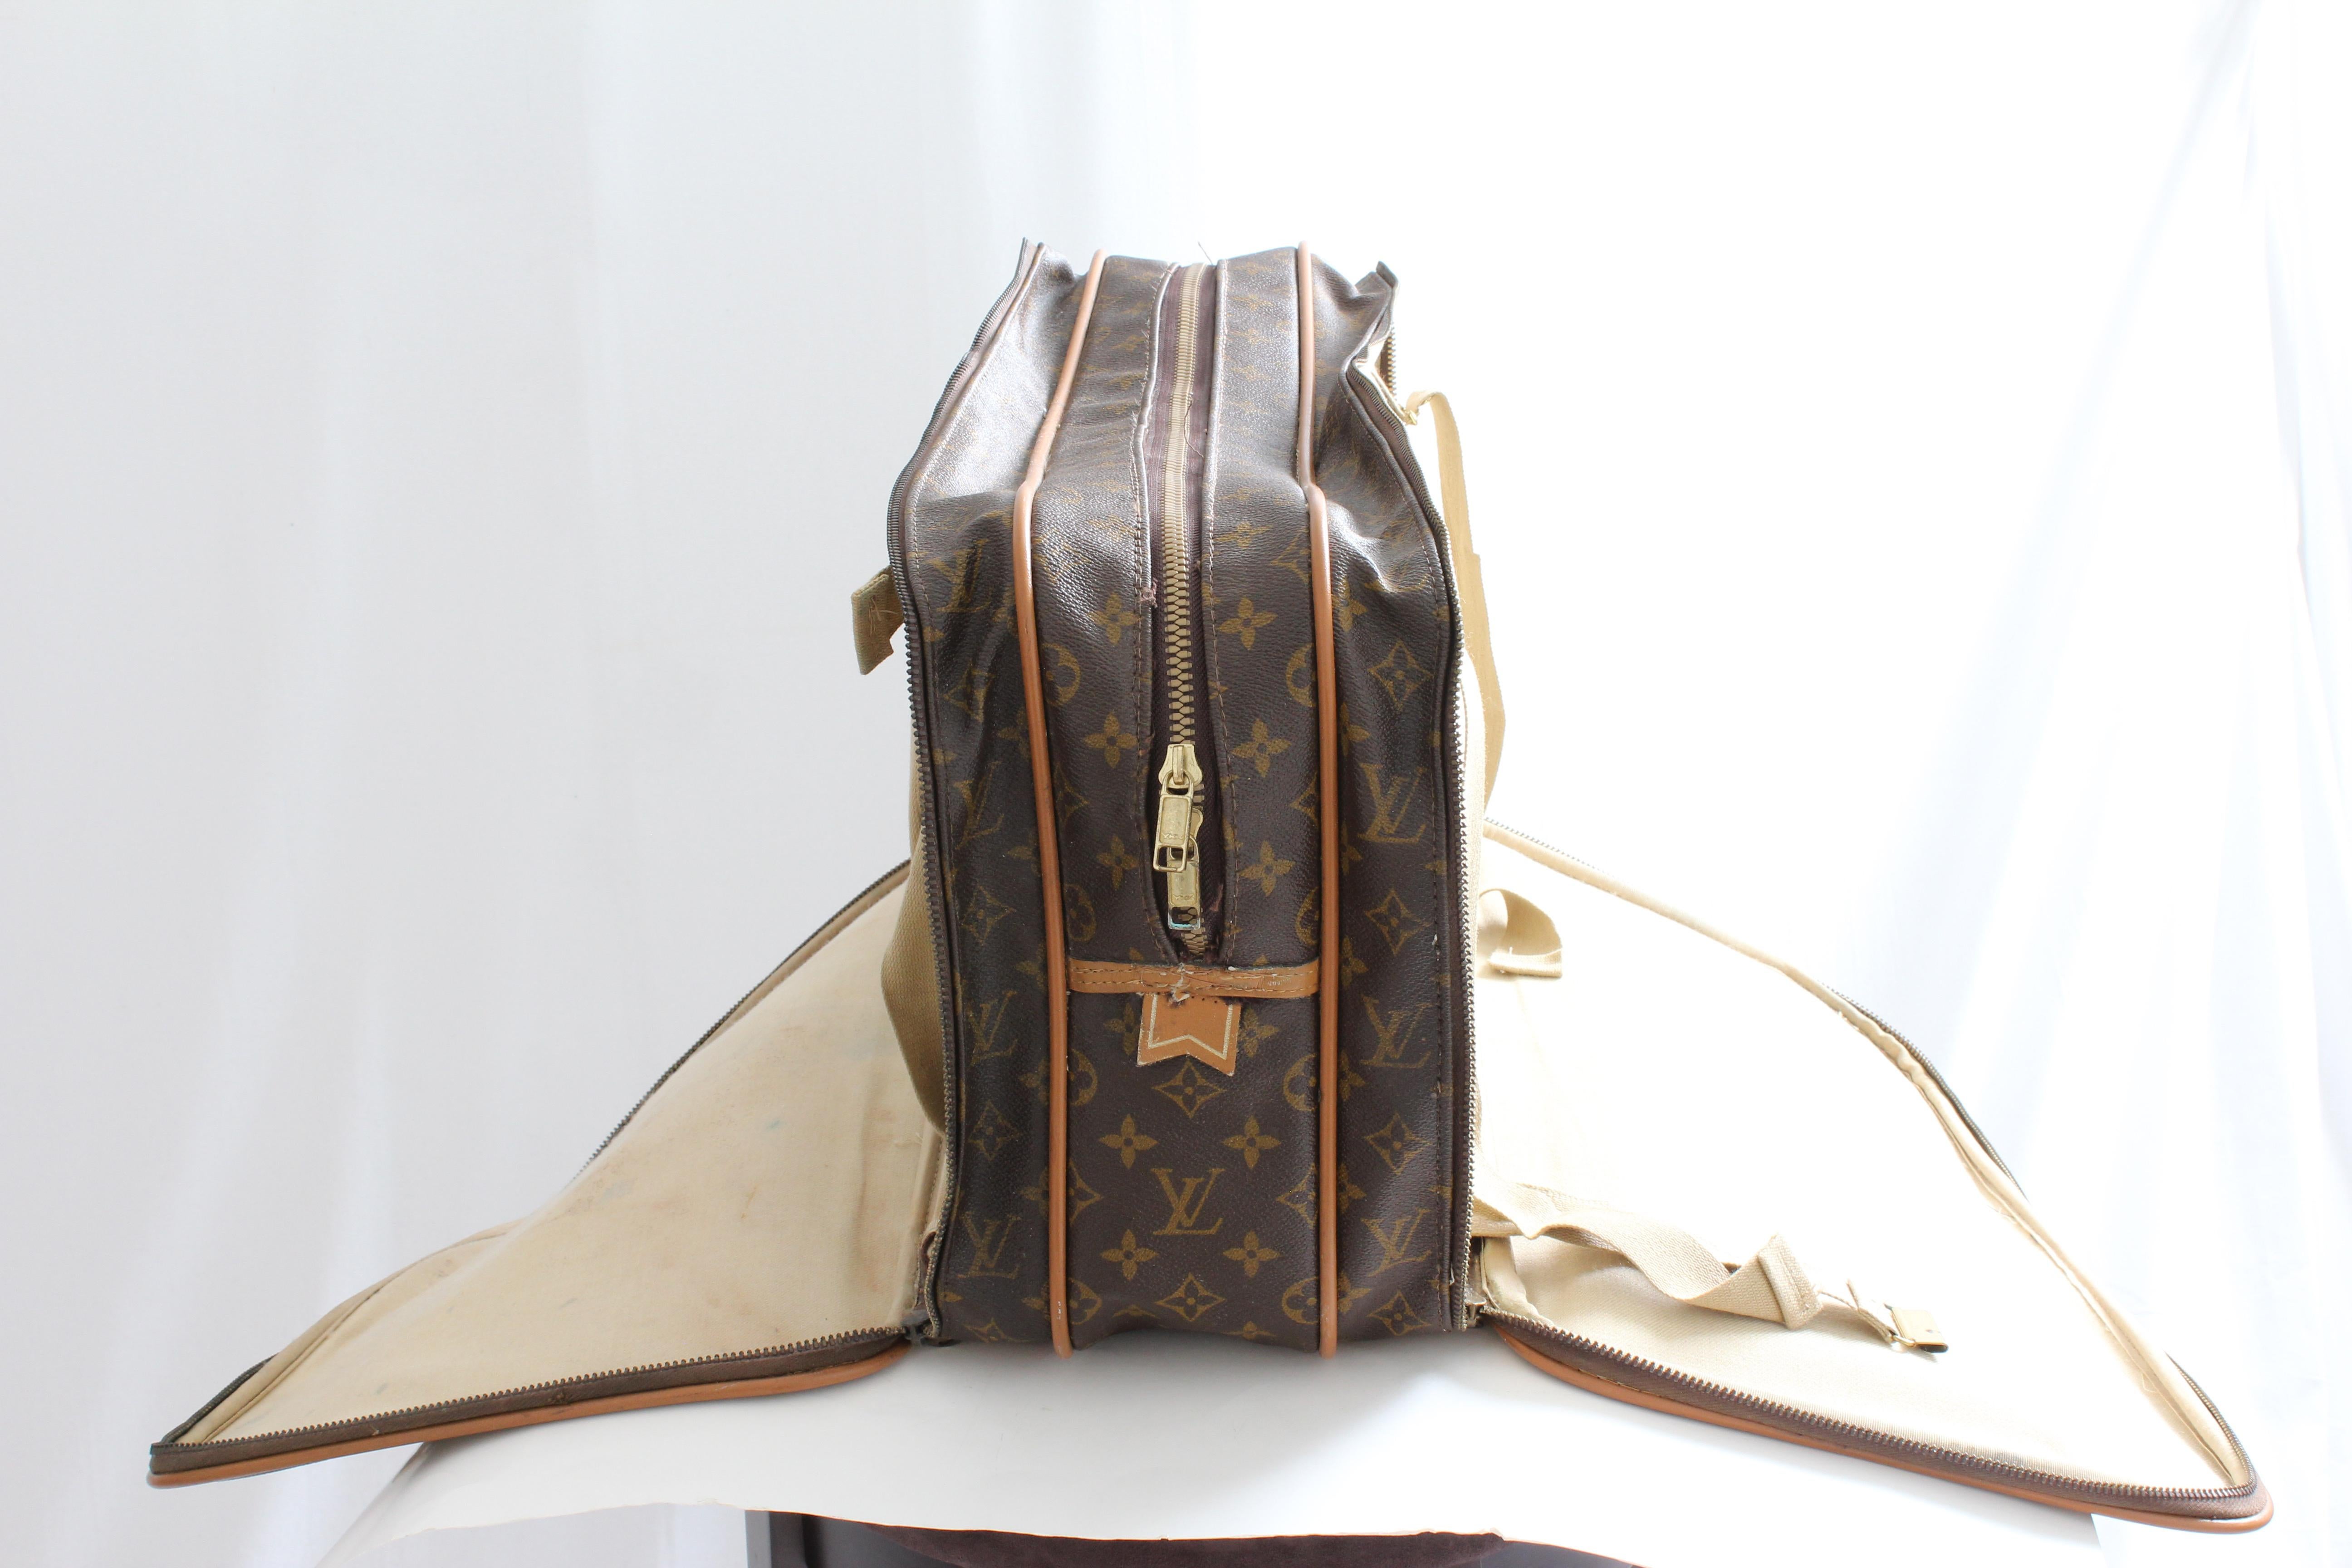 Women's or Men's Louis Vuitton Soft Sided Suitcase Luggage Monogram Weekender Carry All Bag Saks 